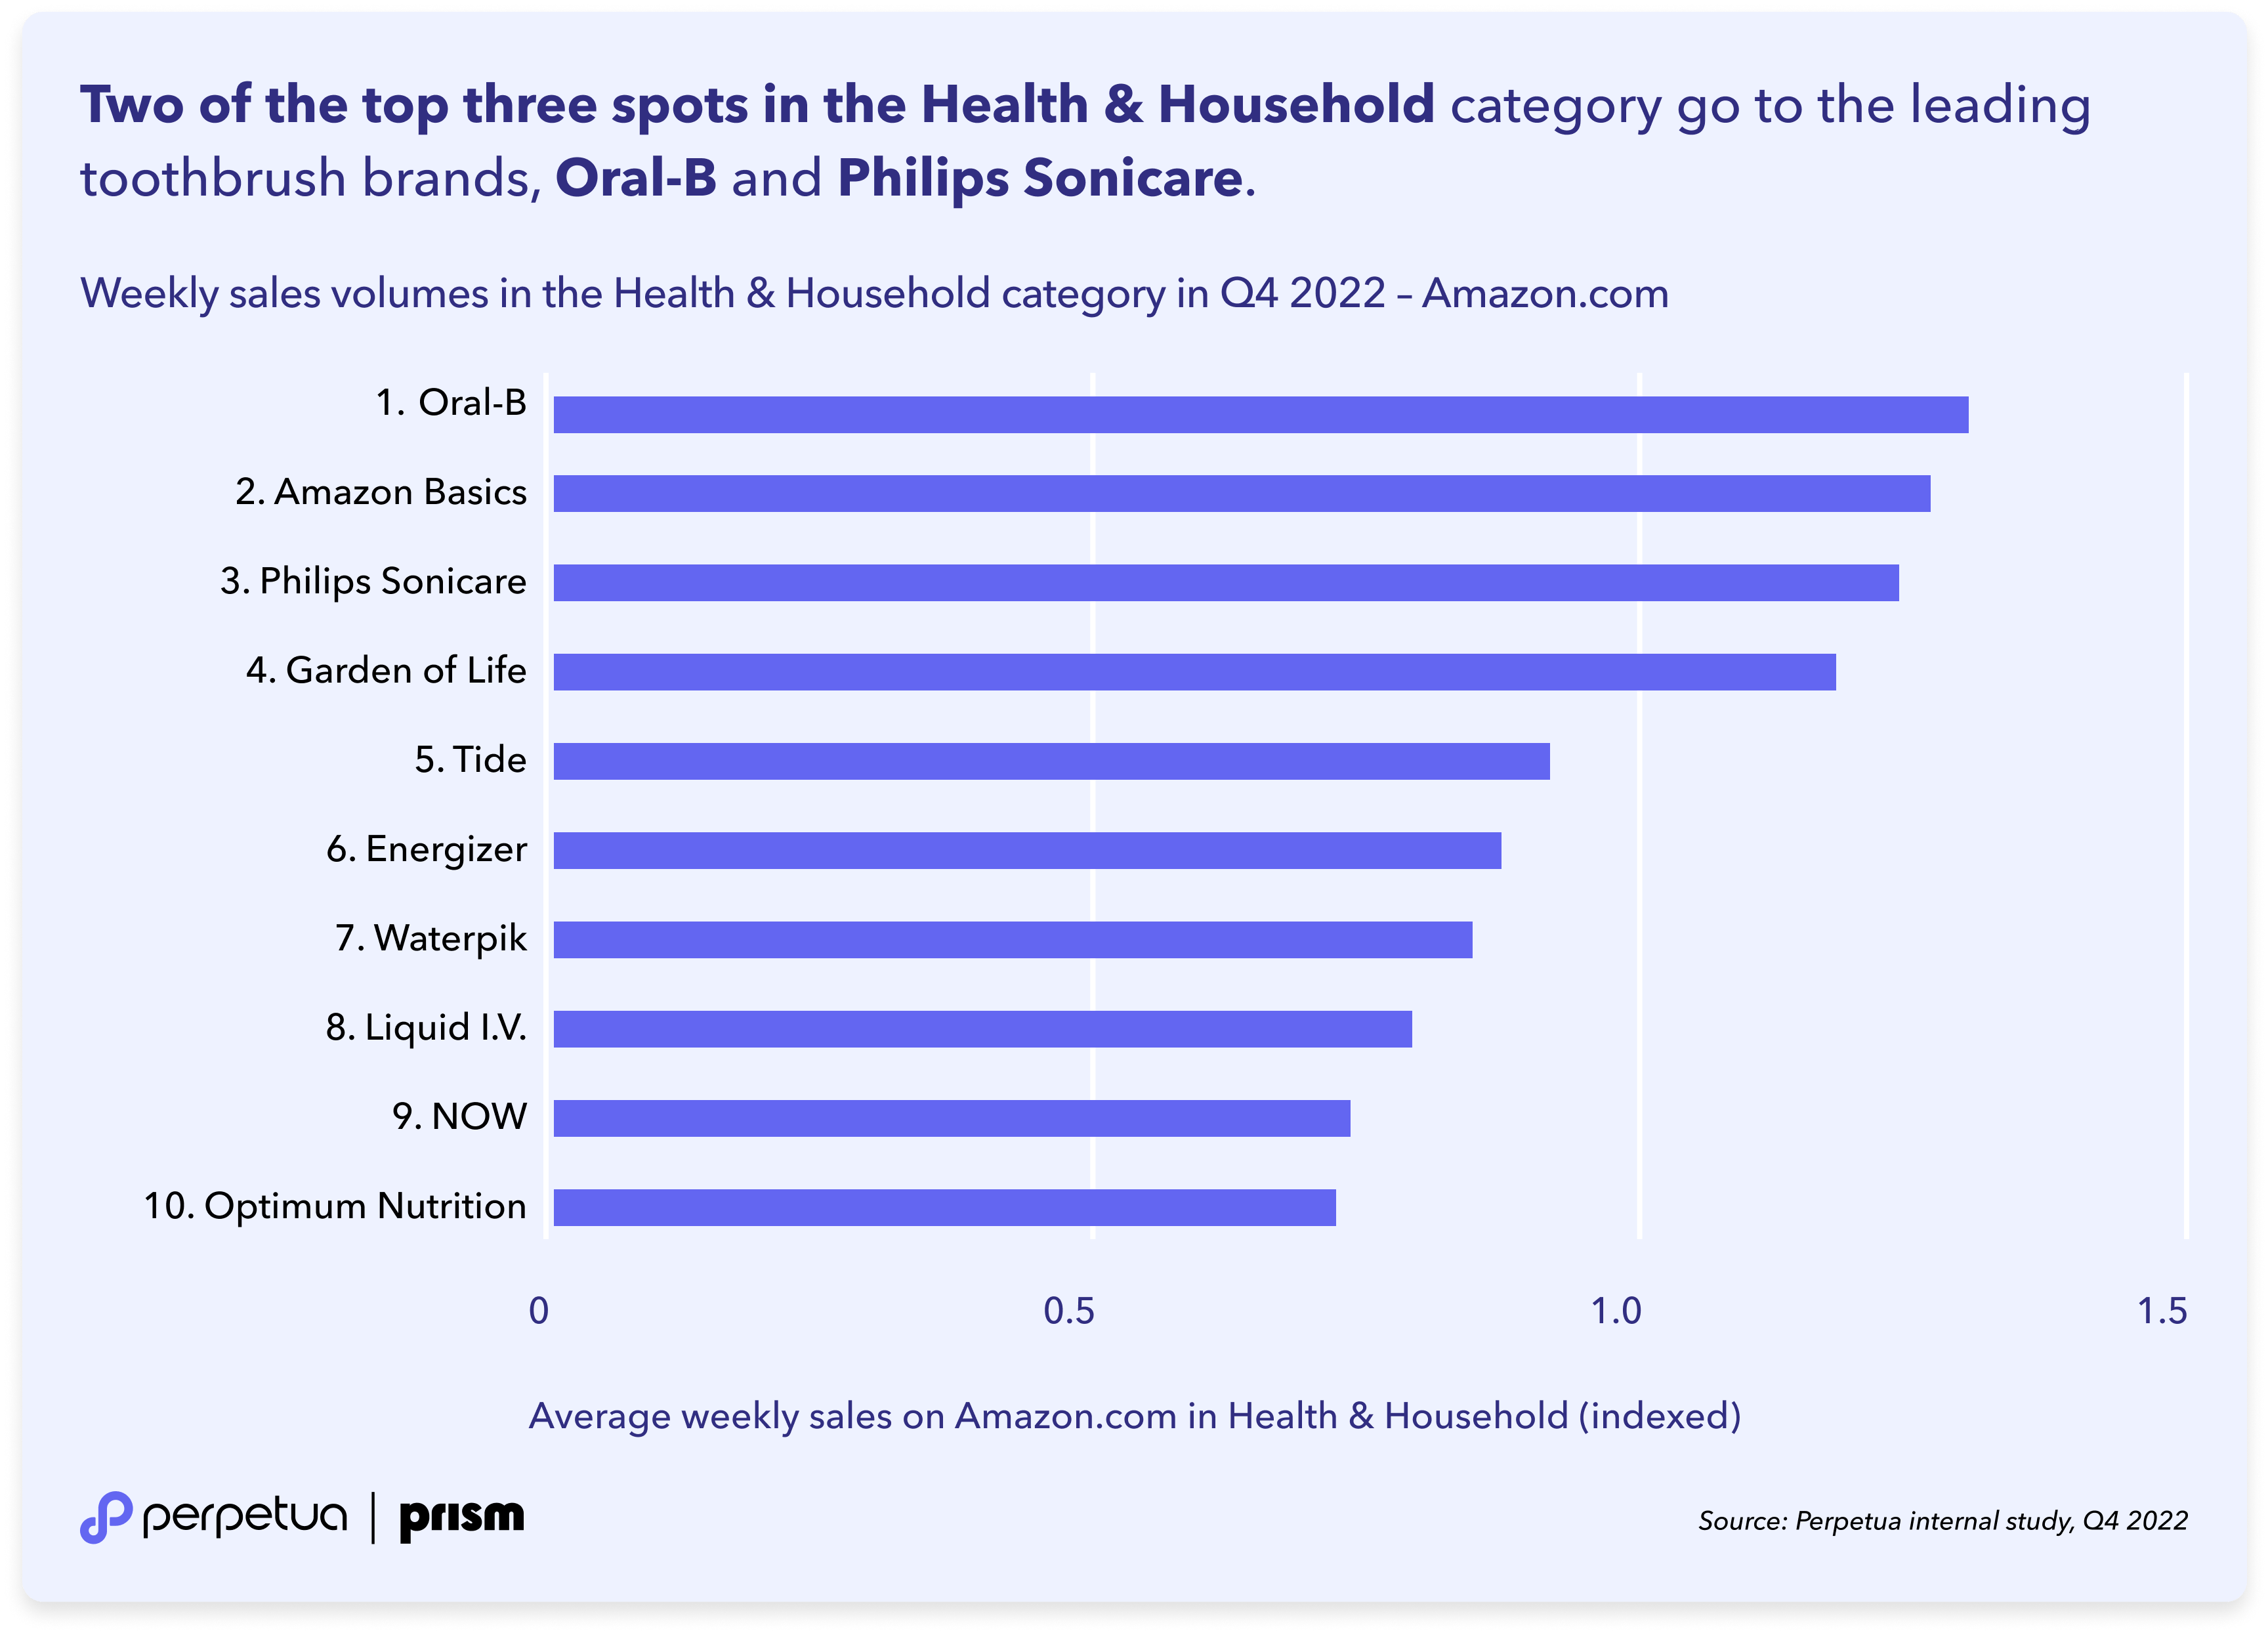 6-Perpetua Prism —Two of the top three spots in the Health & Household category go to the leading toothbrush brands, Oral-B and Phillips Sonicare